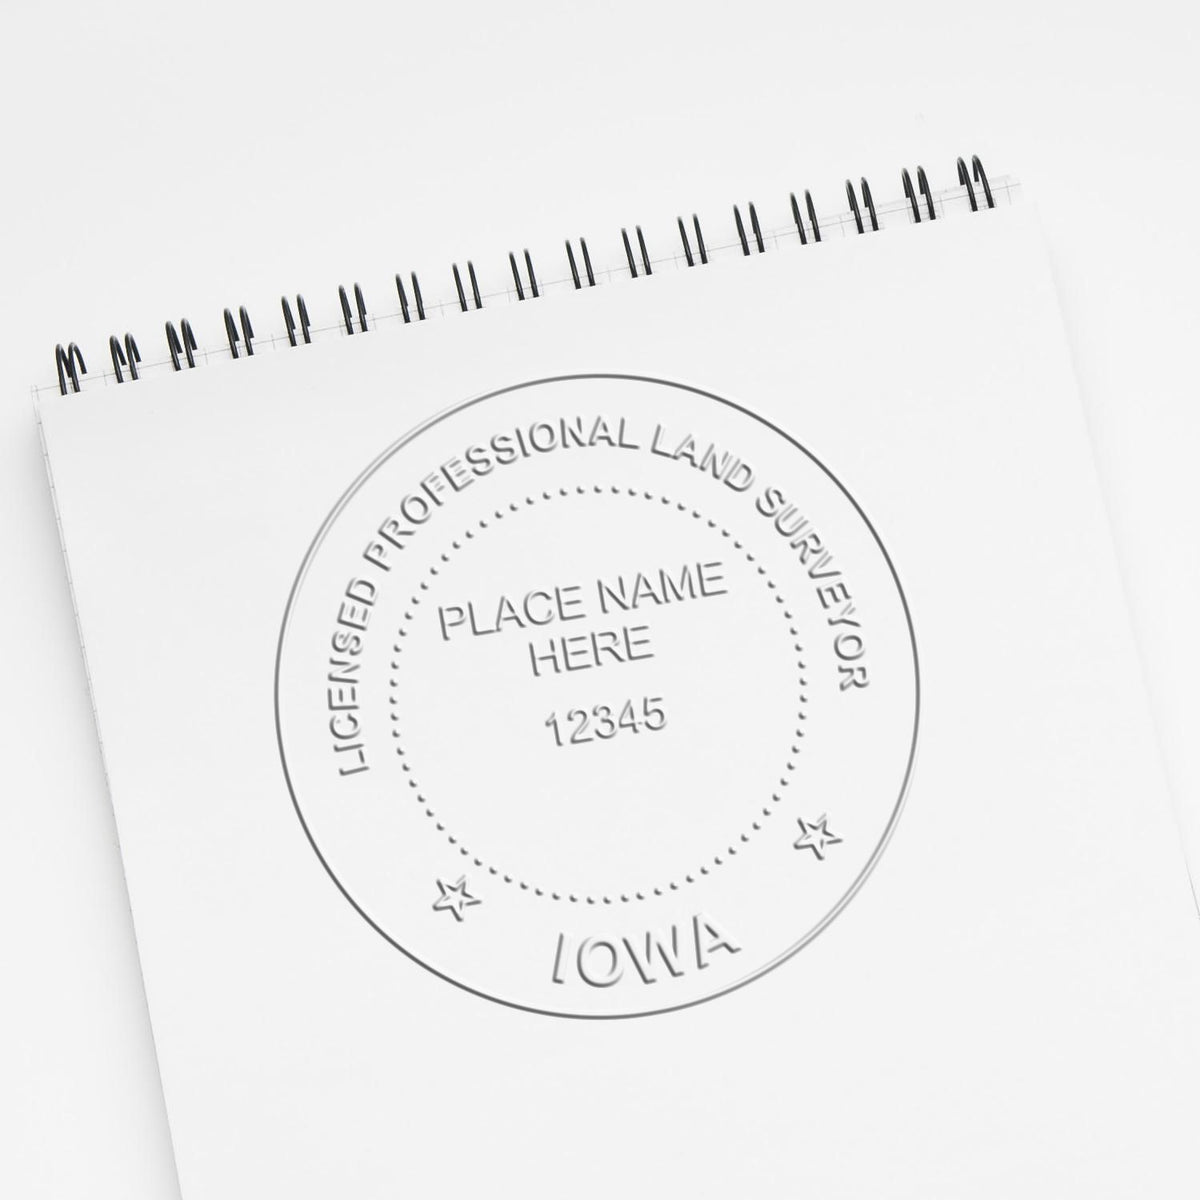 A photograph of the Iowa Desk Surveyor Seal Embosser stamp impression reveals a vivid, professional image of the on paper.